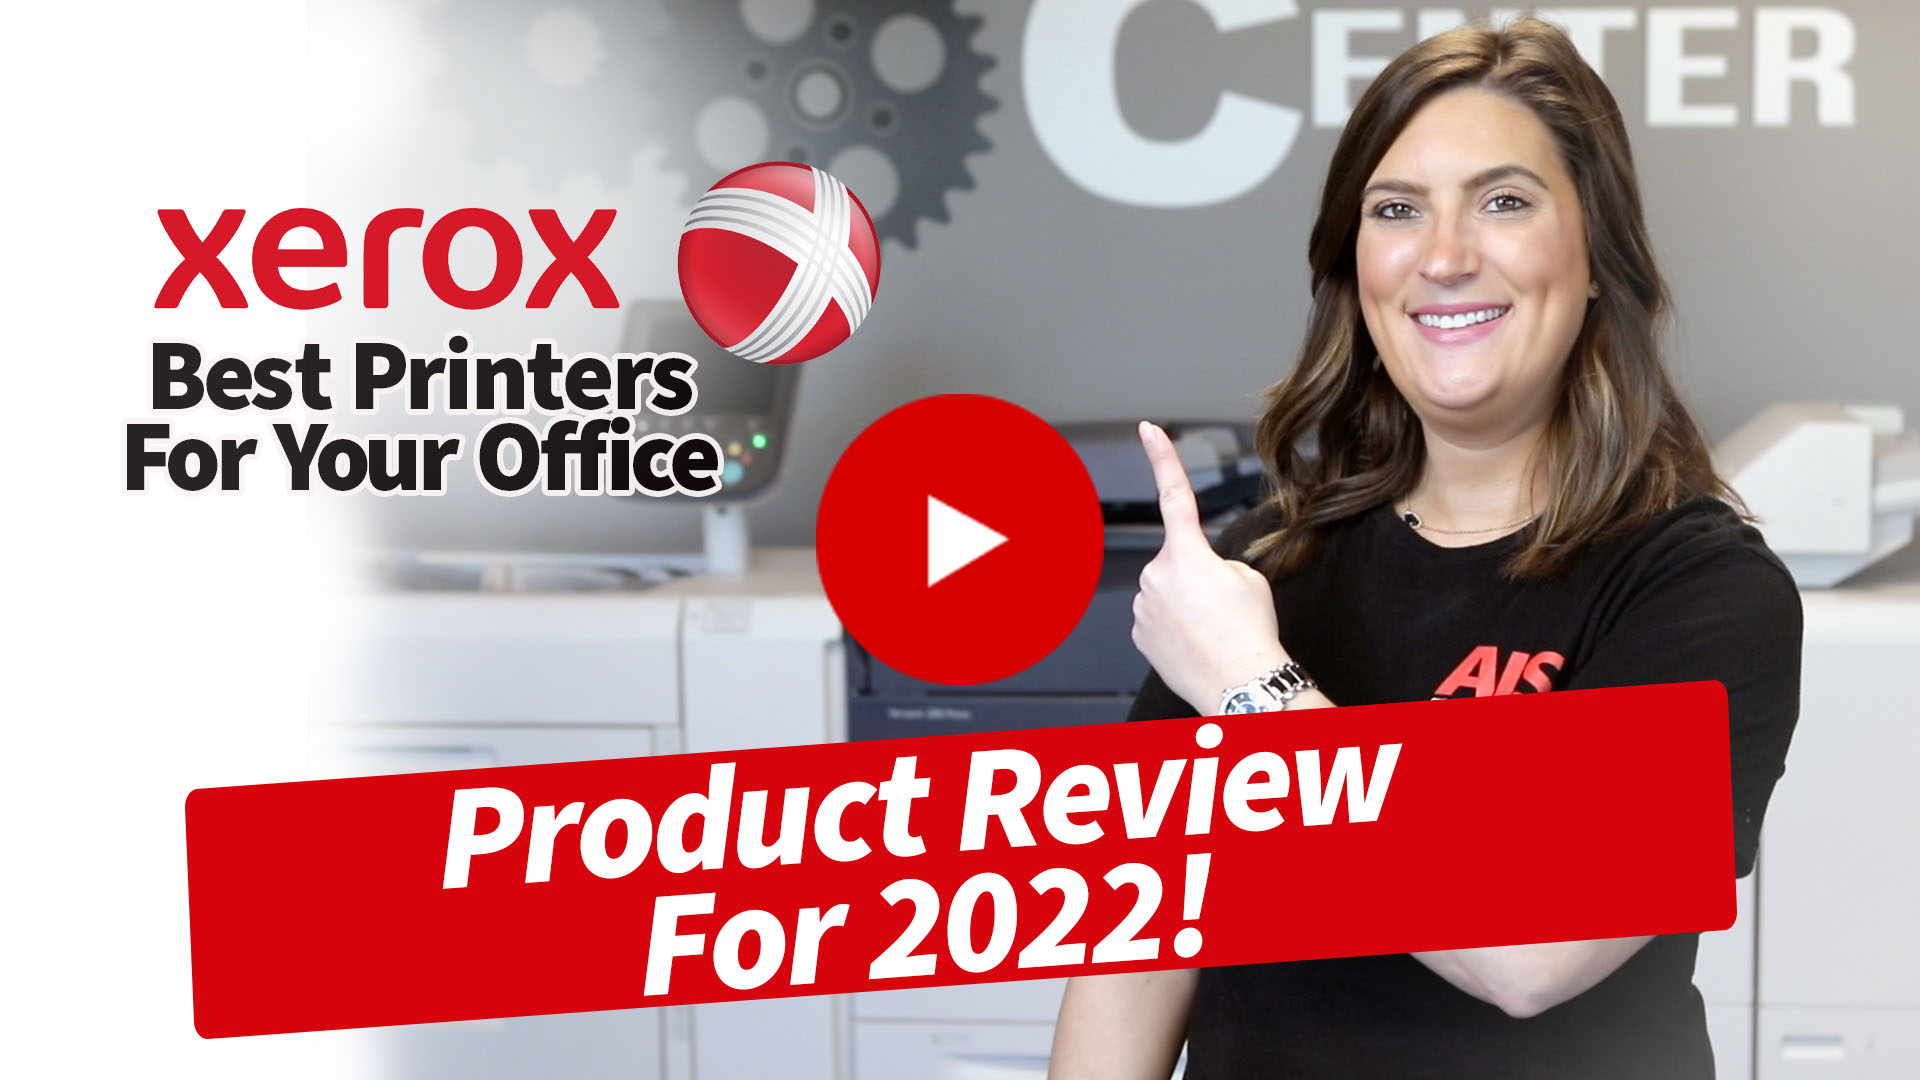 Xerox Product Review 2022